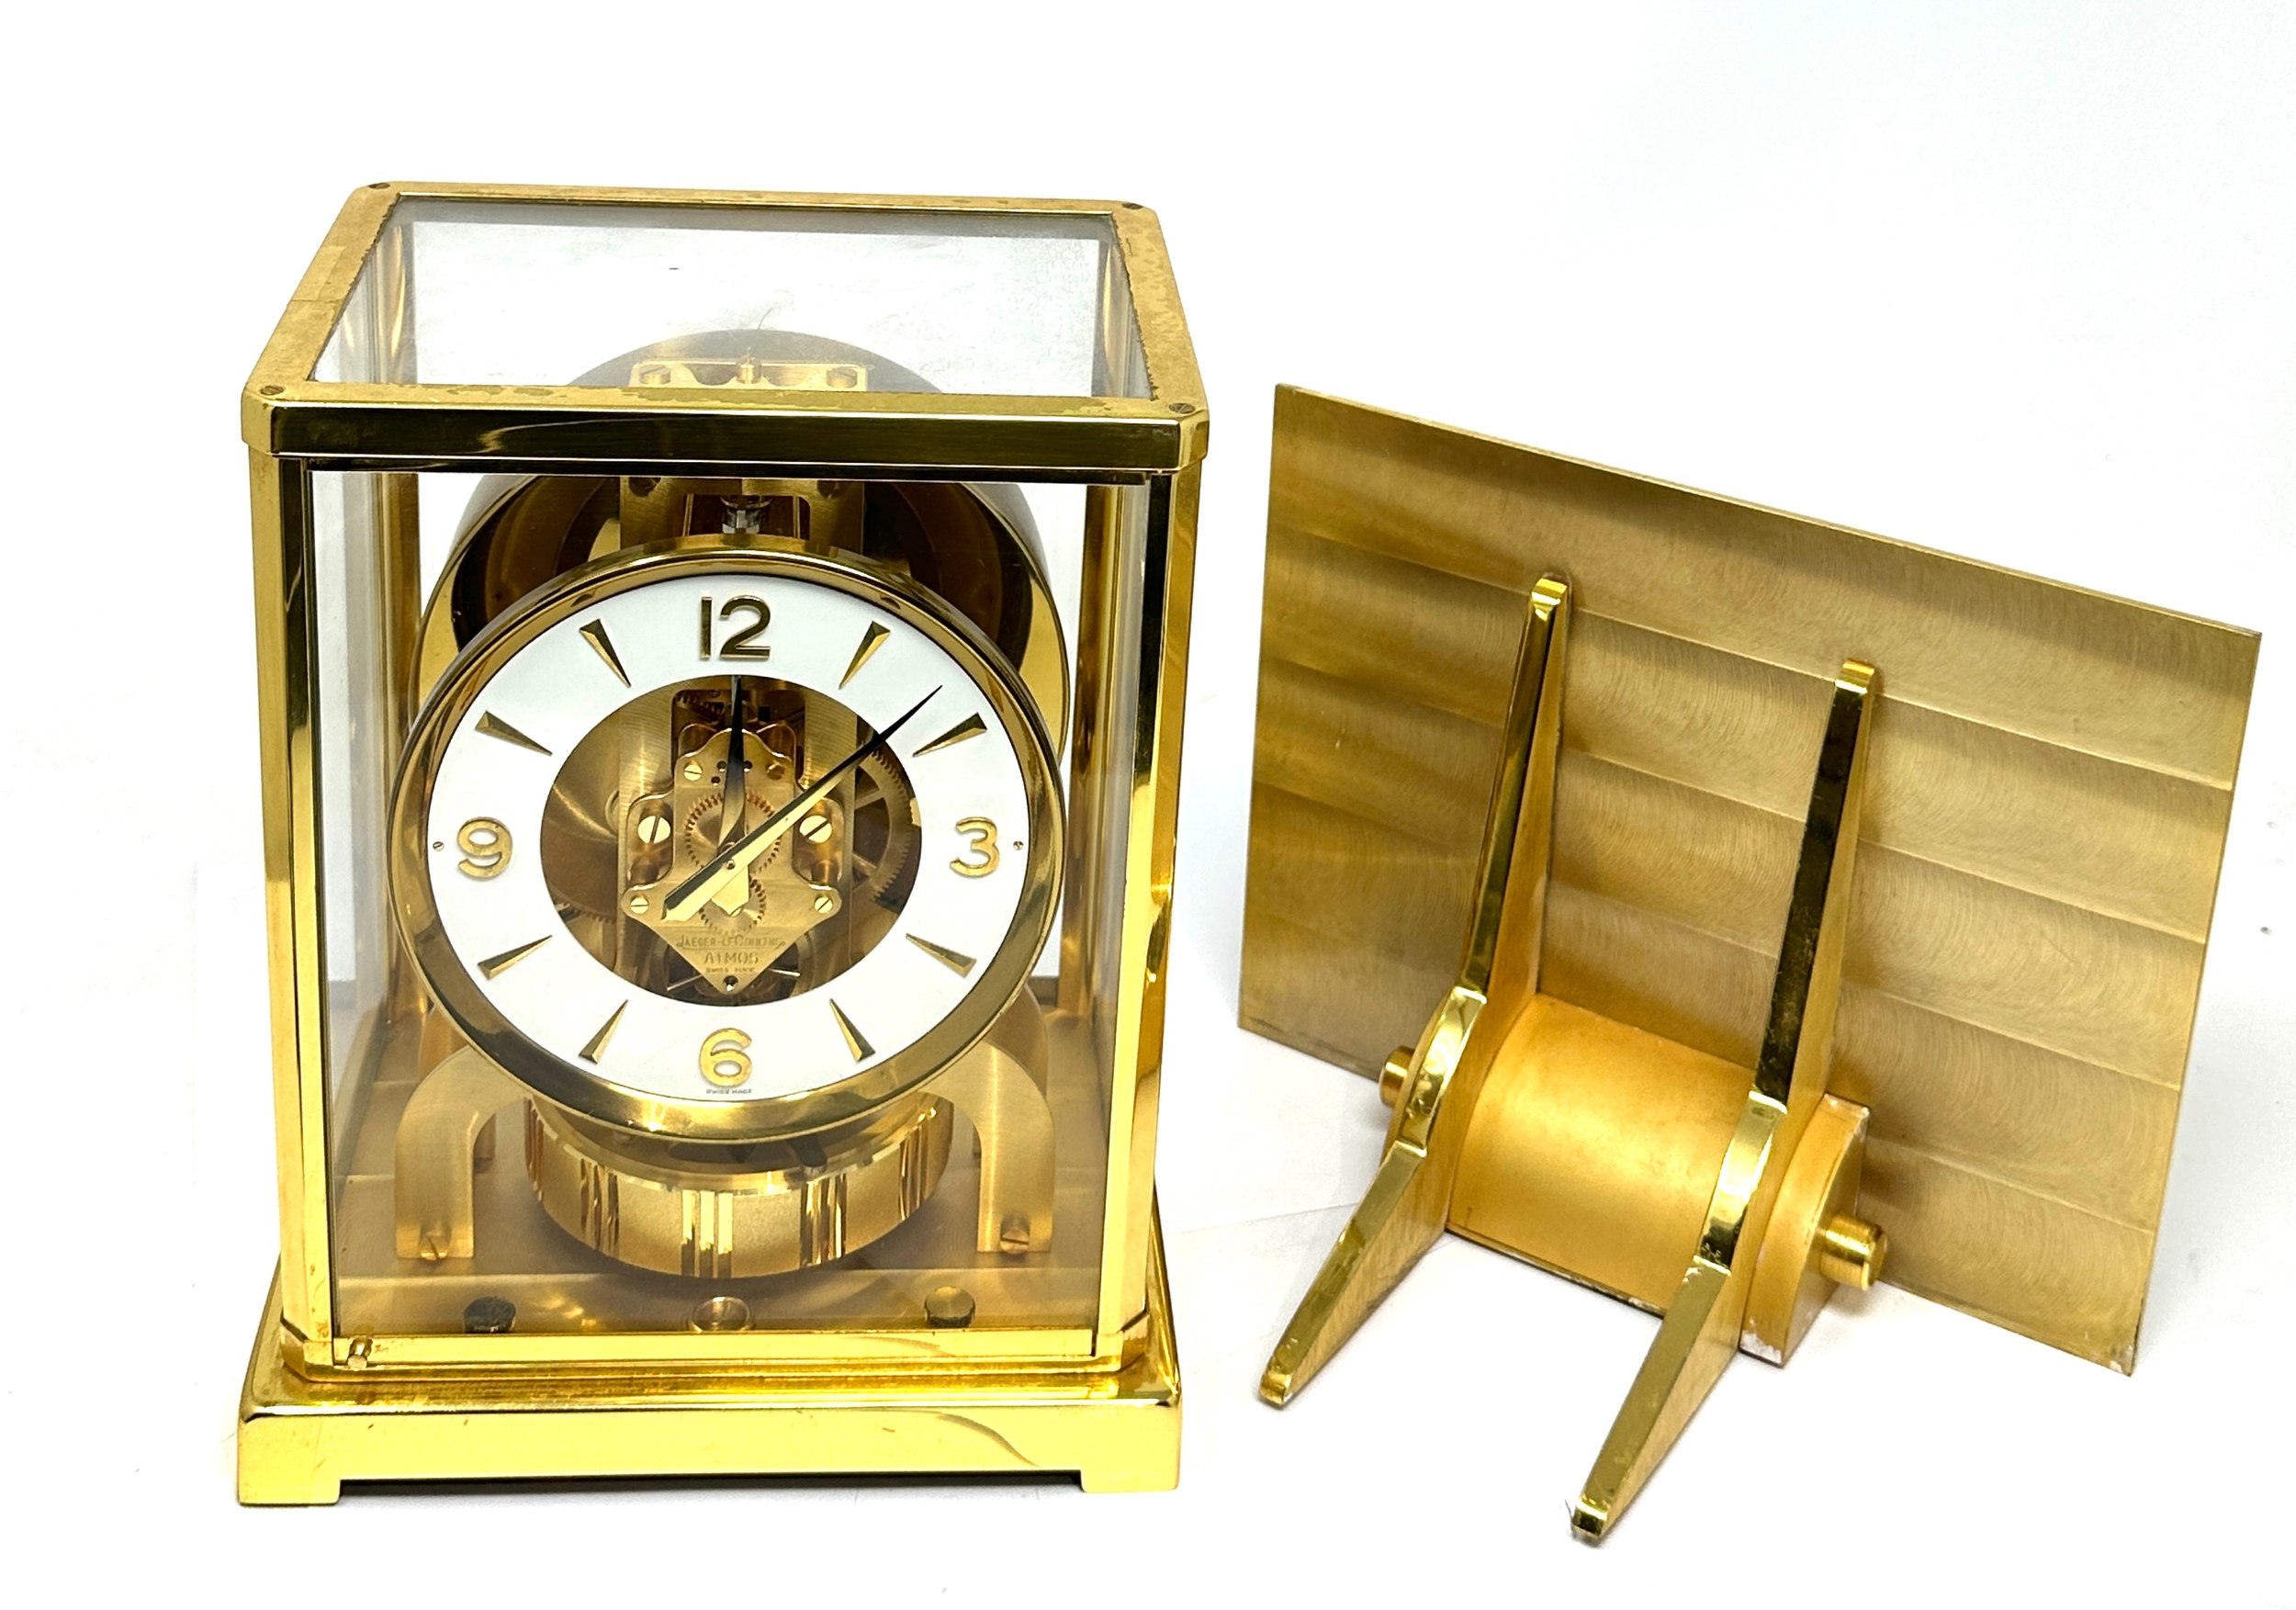 Jaeger lecoultre Atmos 435704 brass & glass mantel clock and shelf bracket measures approx height